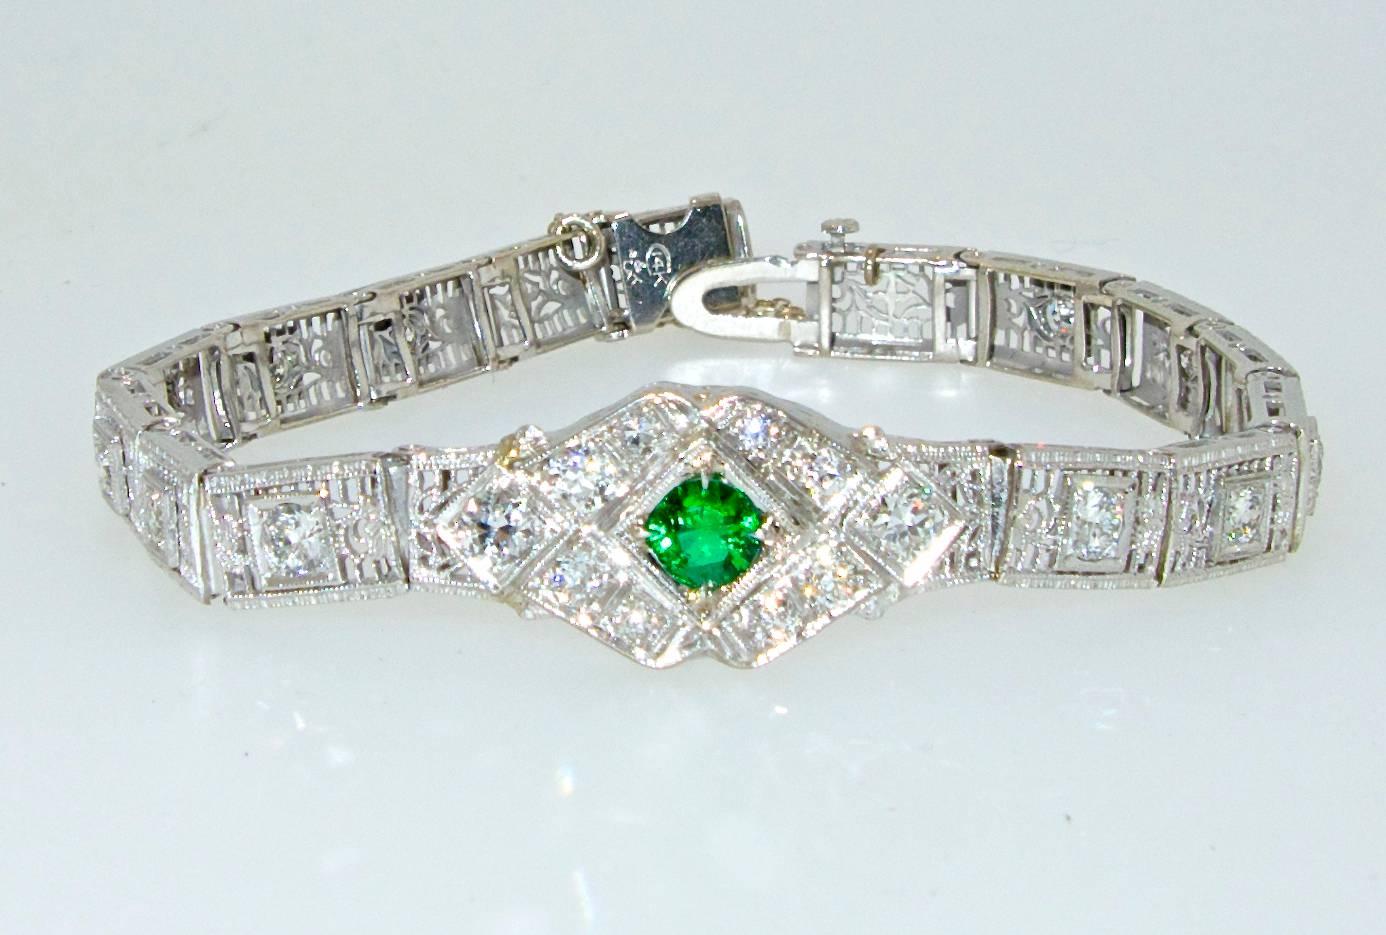 The center emerald is a fine clear bright green natural stone, it weighs .40 cts. The diamonds are all near colorless and very slightly included and weigh approximately 2.0 cts.  This bracelet is both 14K and platinum.